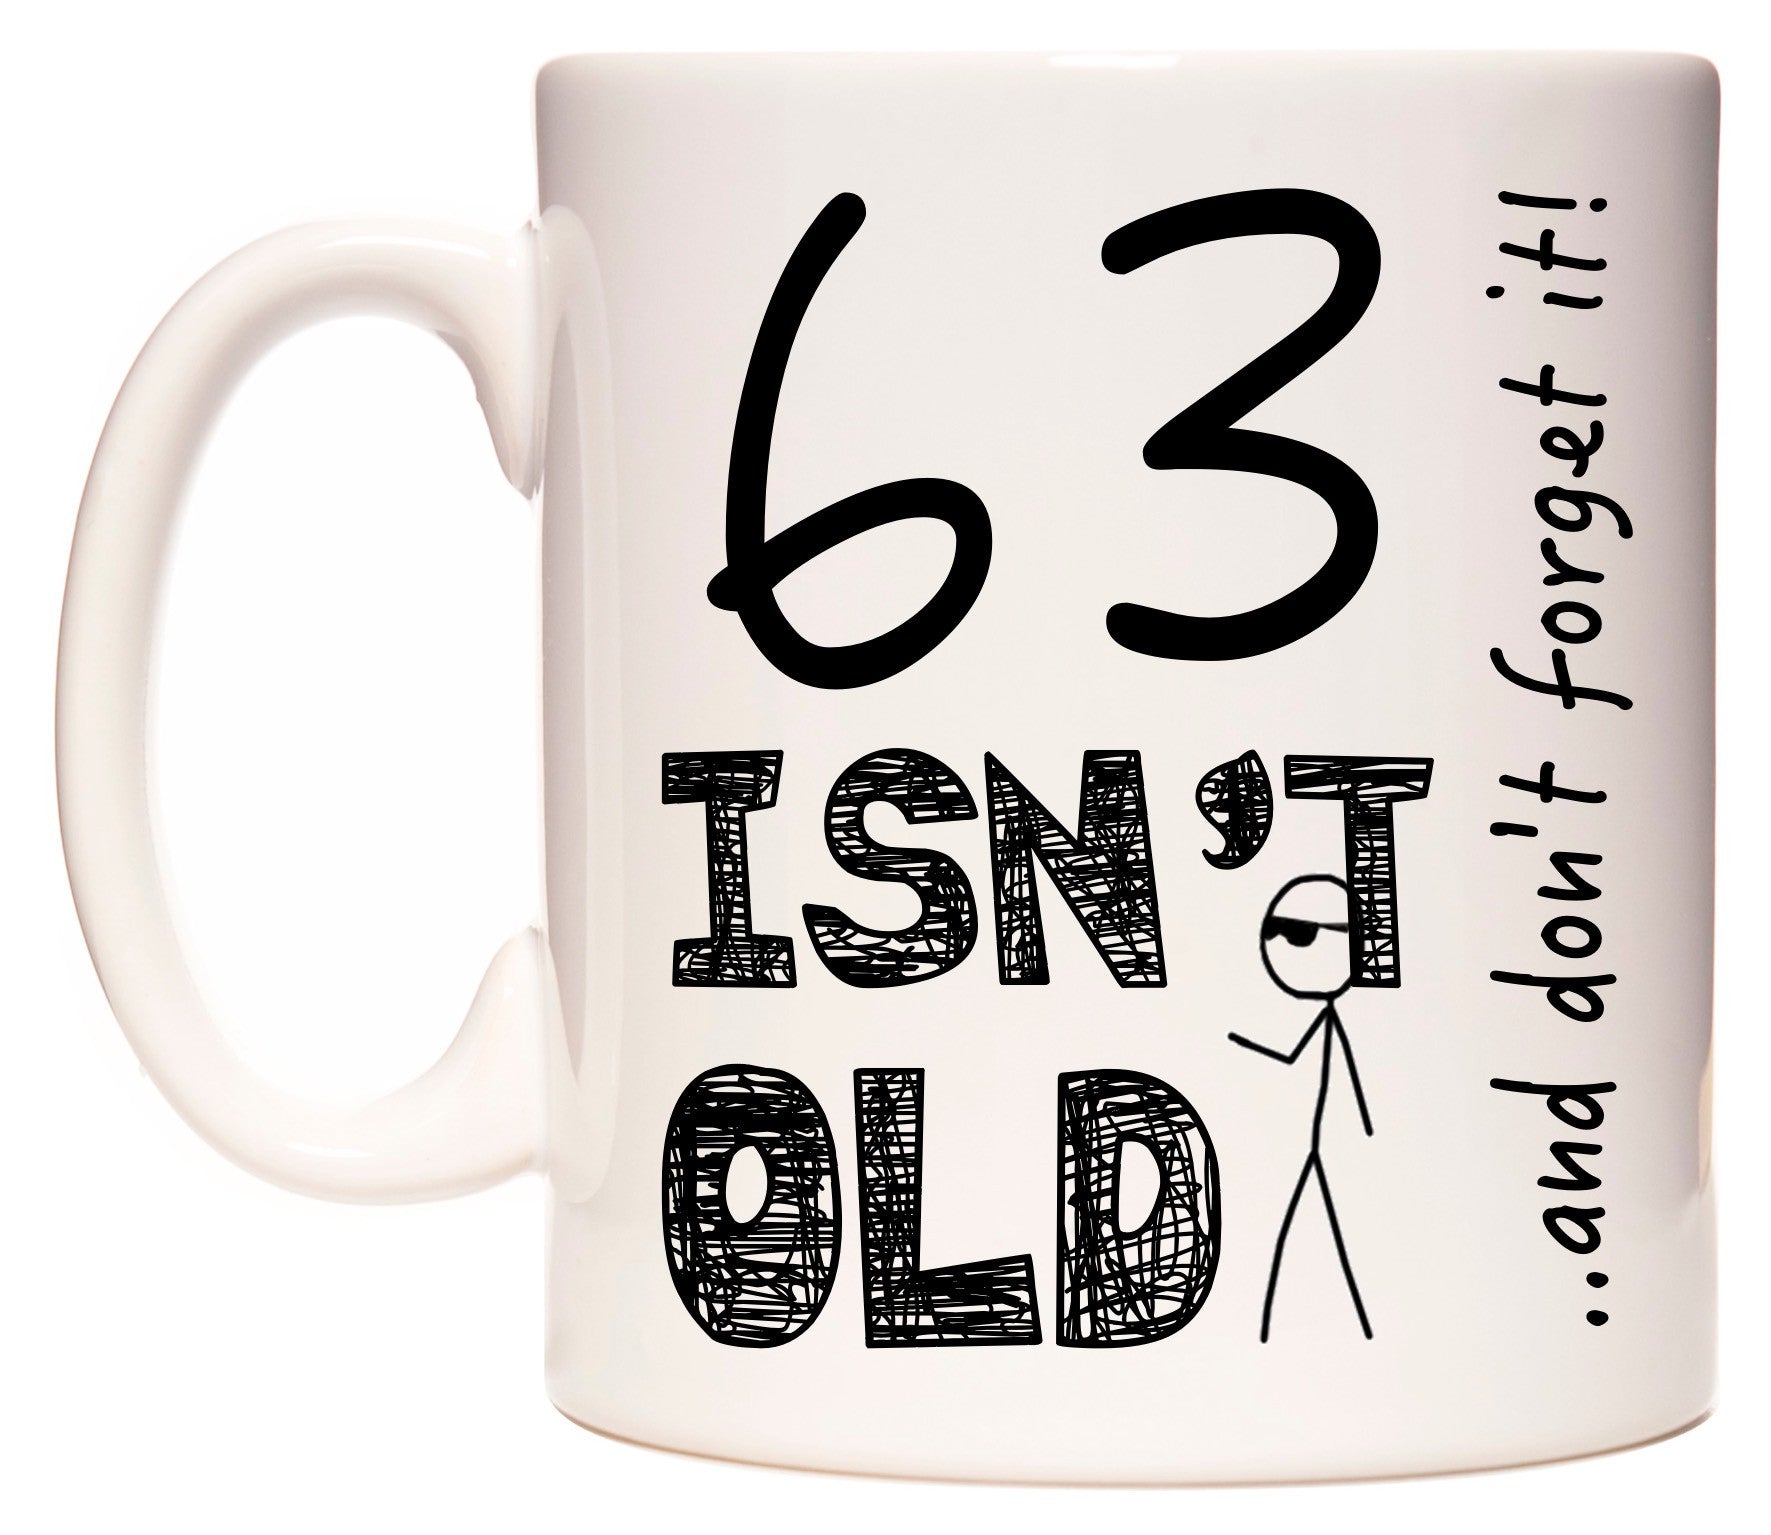 This mug features 63 Isn't Old